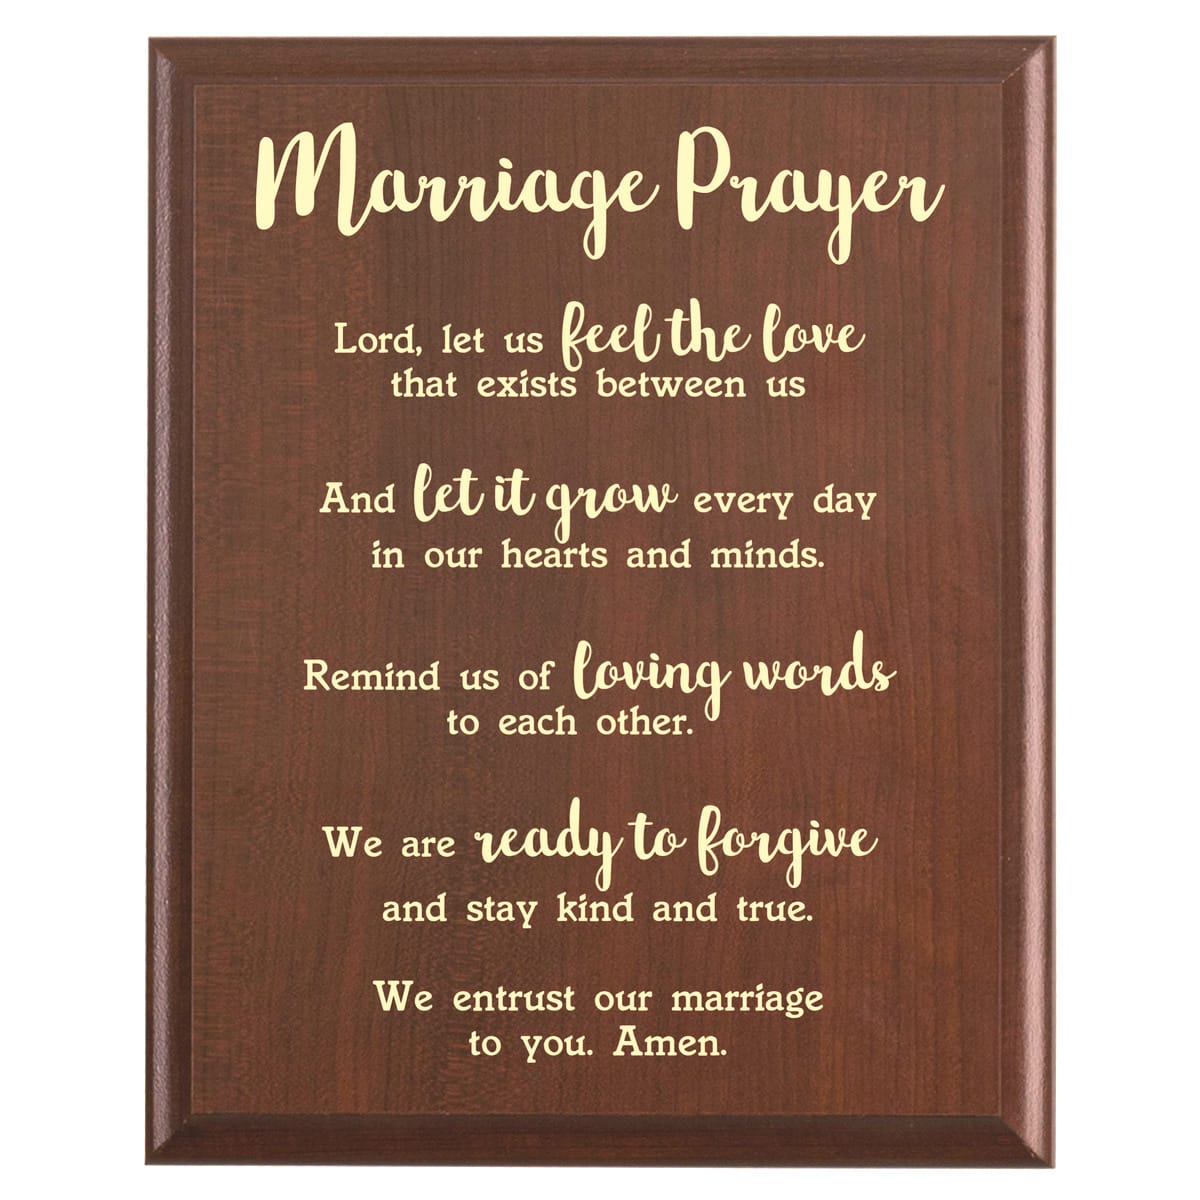 Plaque photo: Marriage Prayer Plaque design with free personalization. Wood style finish with customized text.